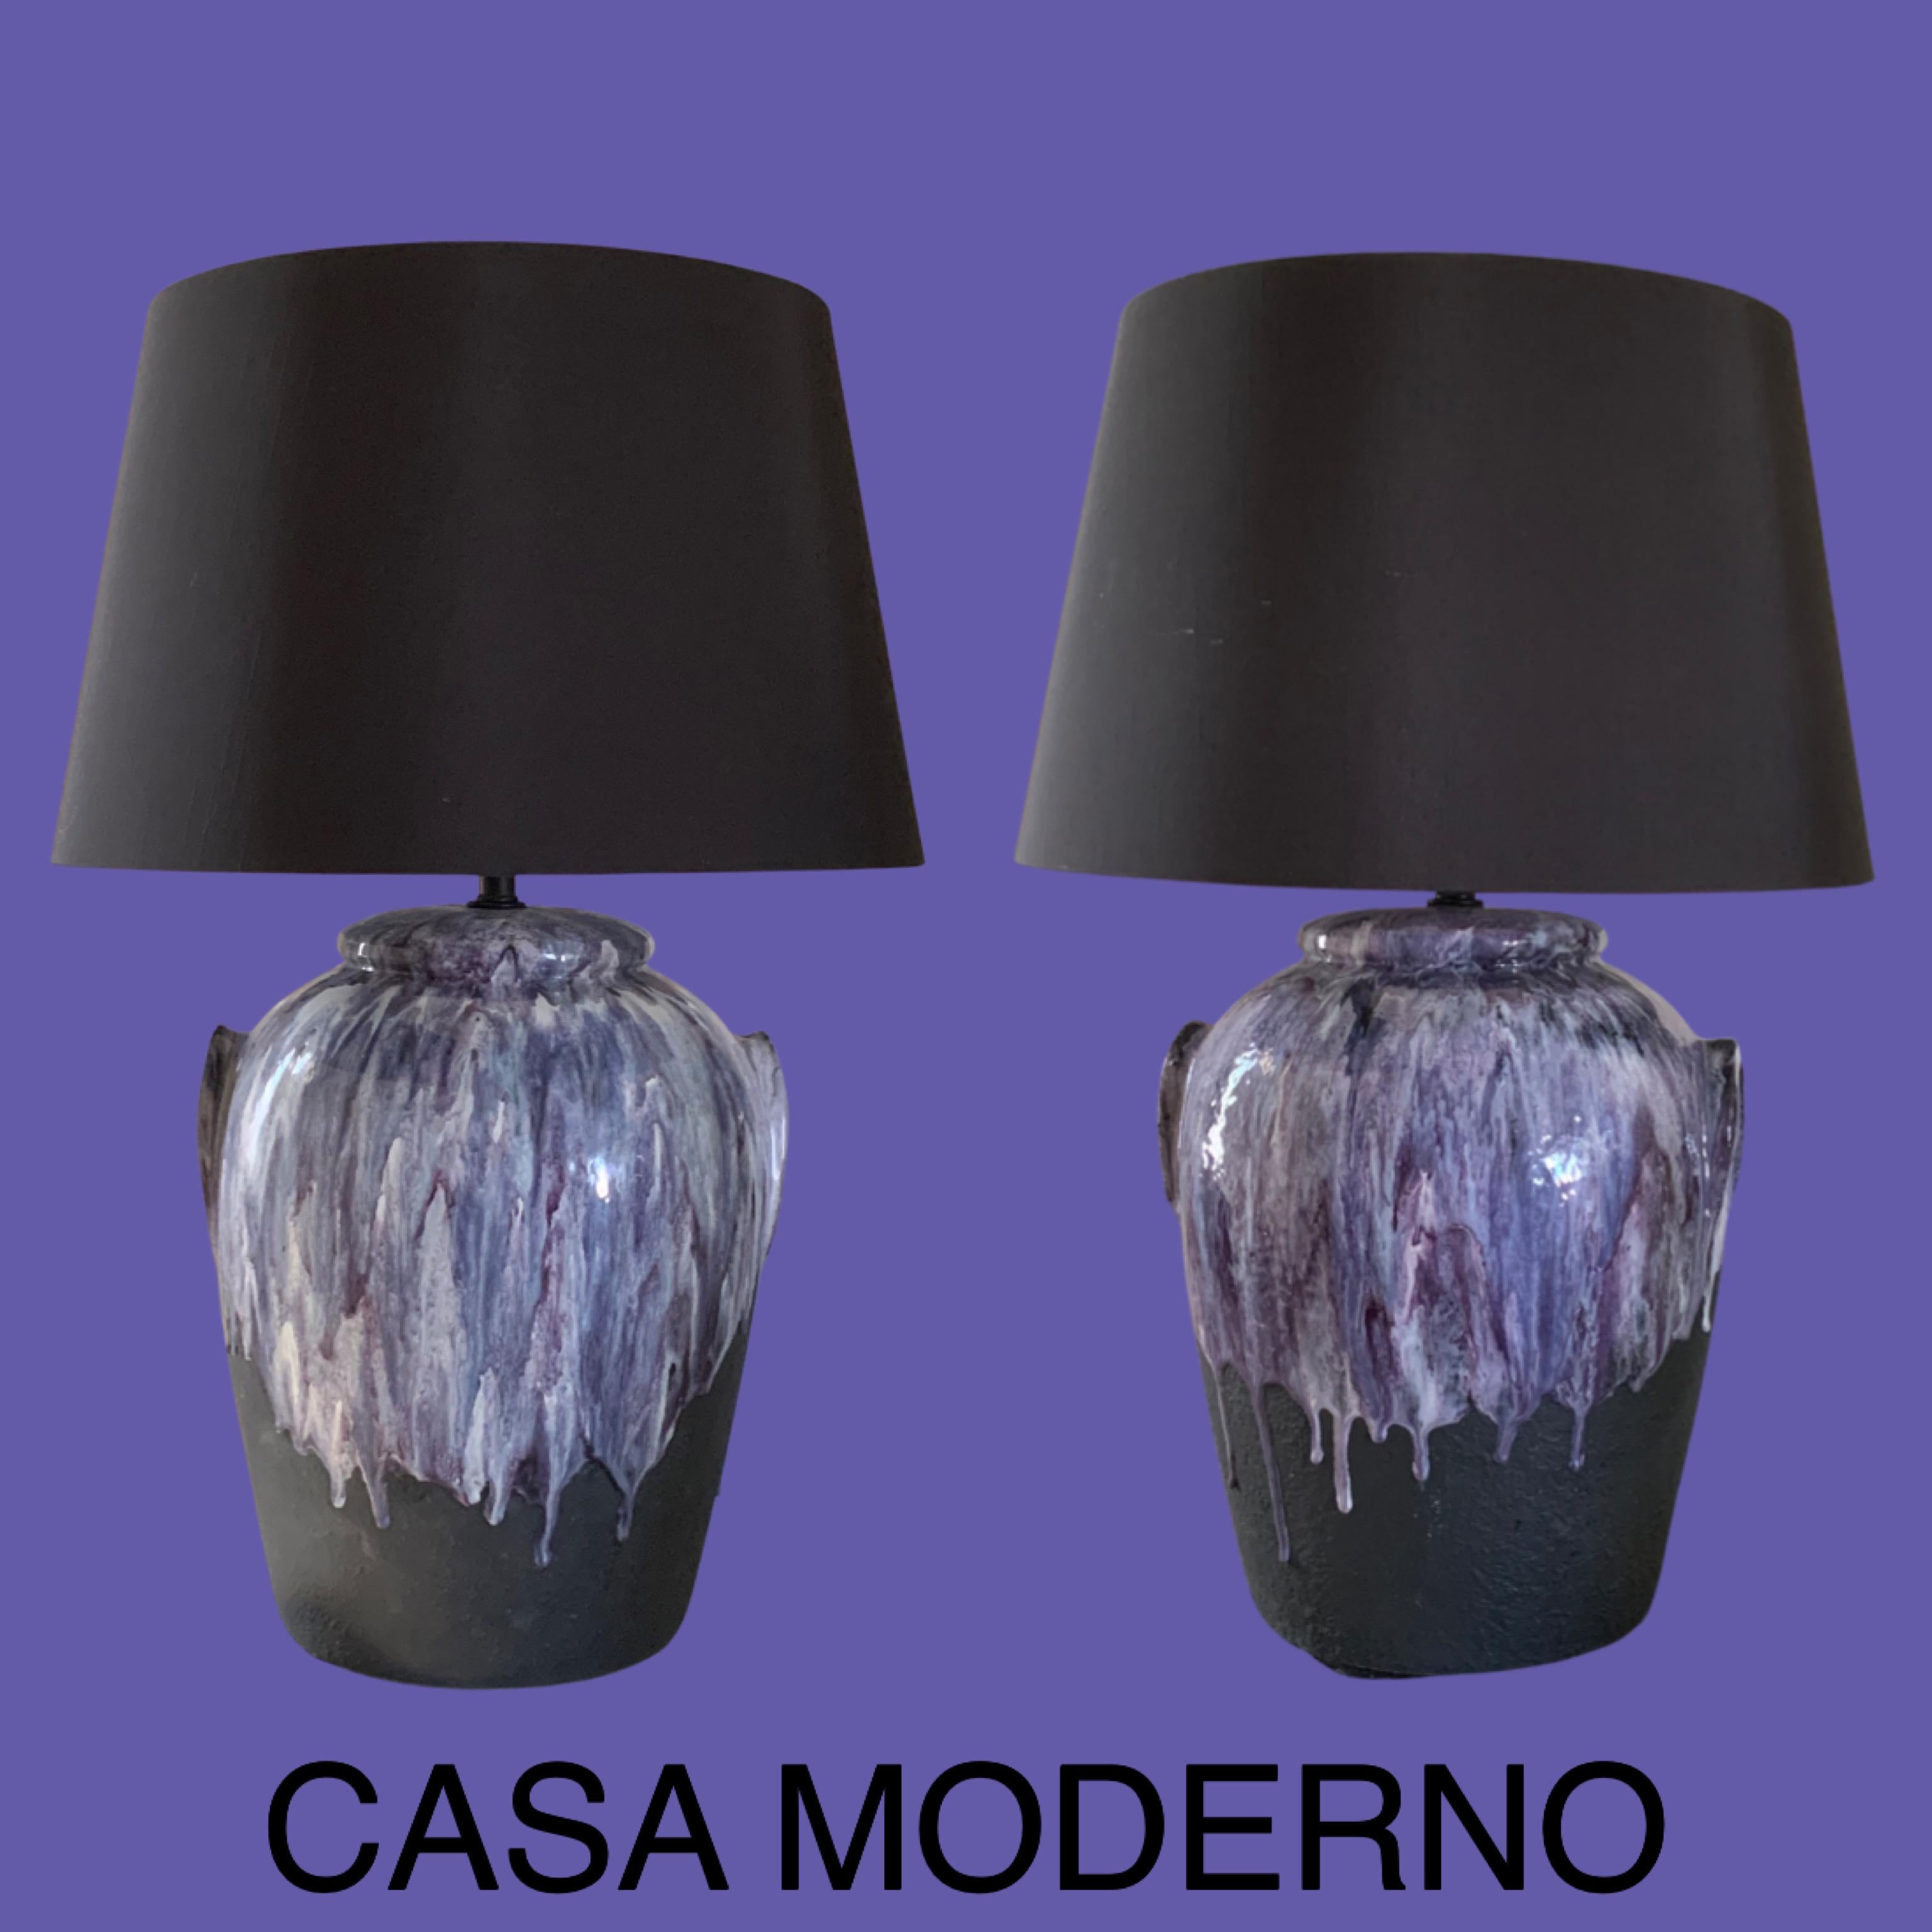 Pair of beautiful modern ceramic lamps from a Palm Springs estate. The lamps have ceramic black bases with an amazing multi shades of purple drip glaze. Beautifully done by the artist in firing the glaze. Decorative jar faux handles on sides. Custom